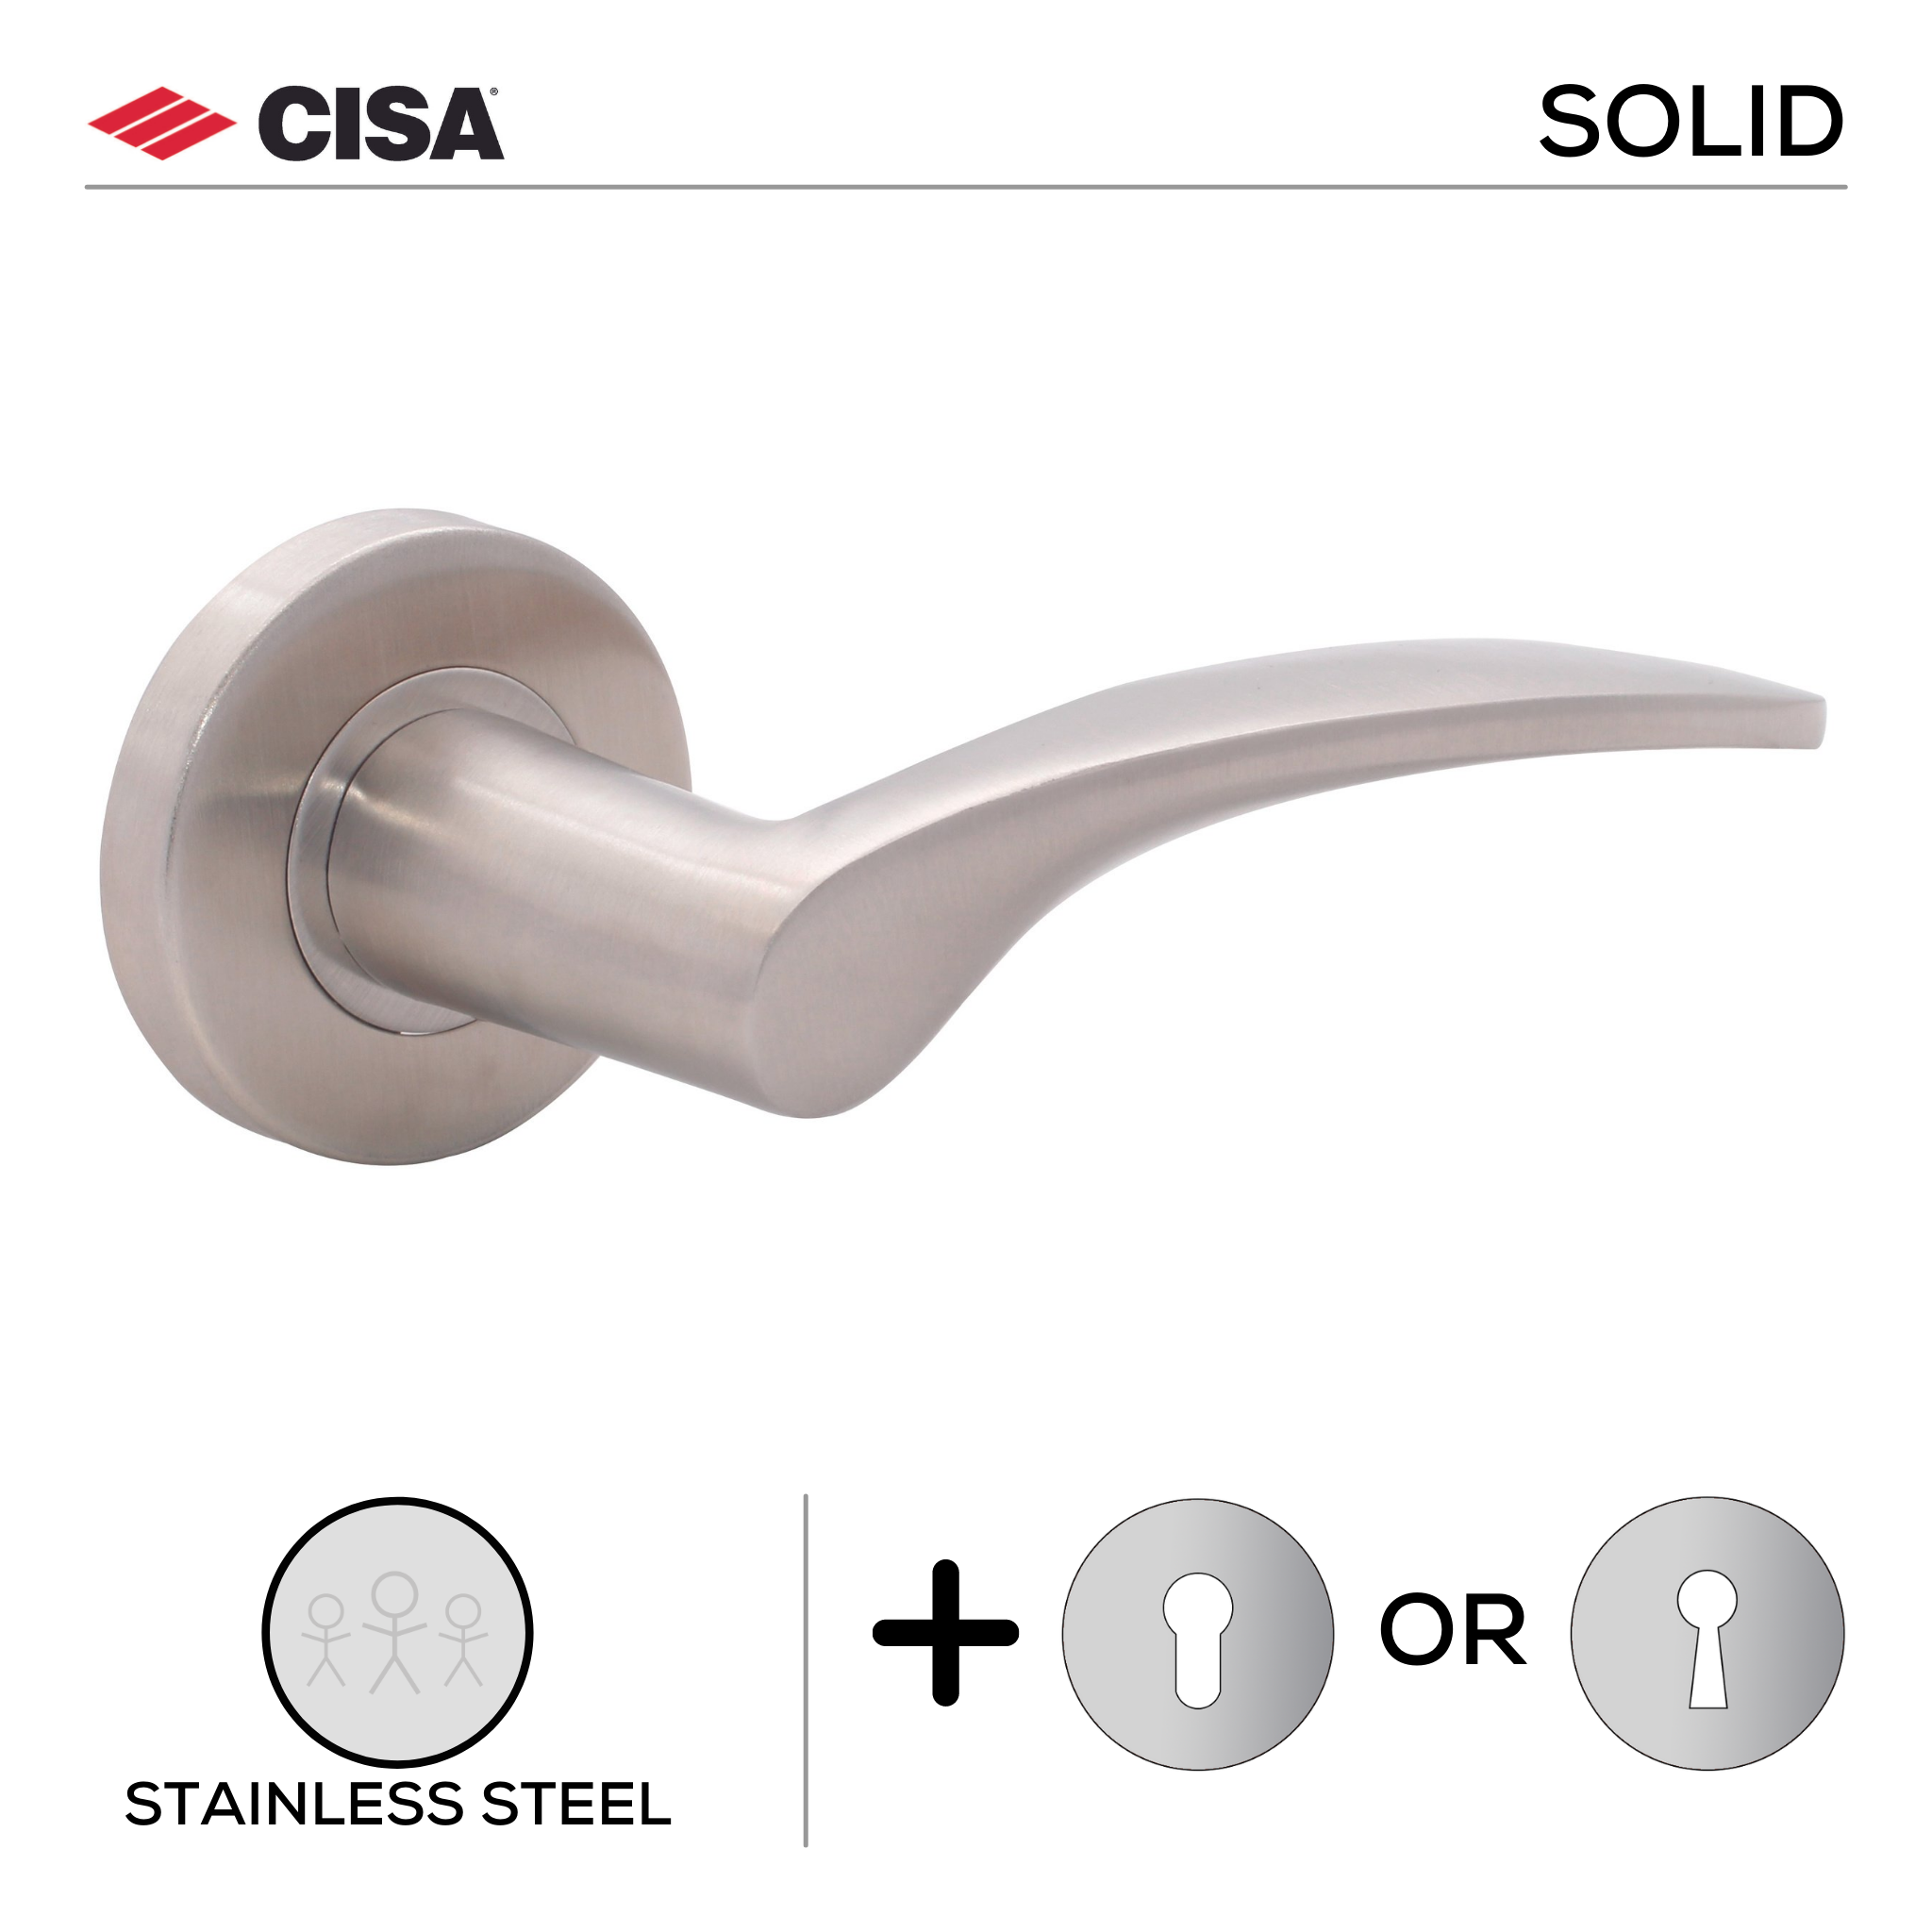 FS115.R._.SS, Lever Handles, Solid, On Round Rose, With Escutcheons, Stainless Steel, CISA